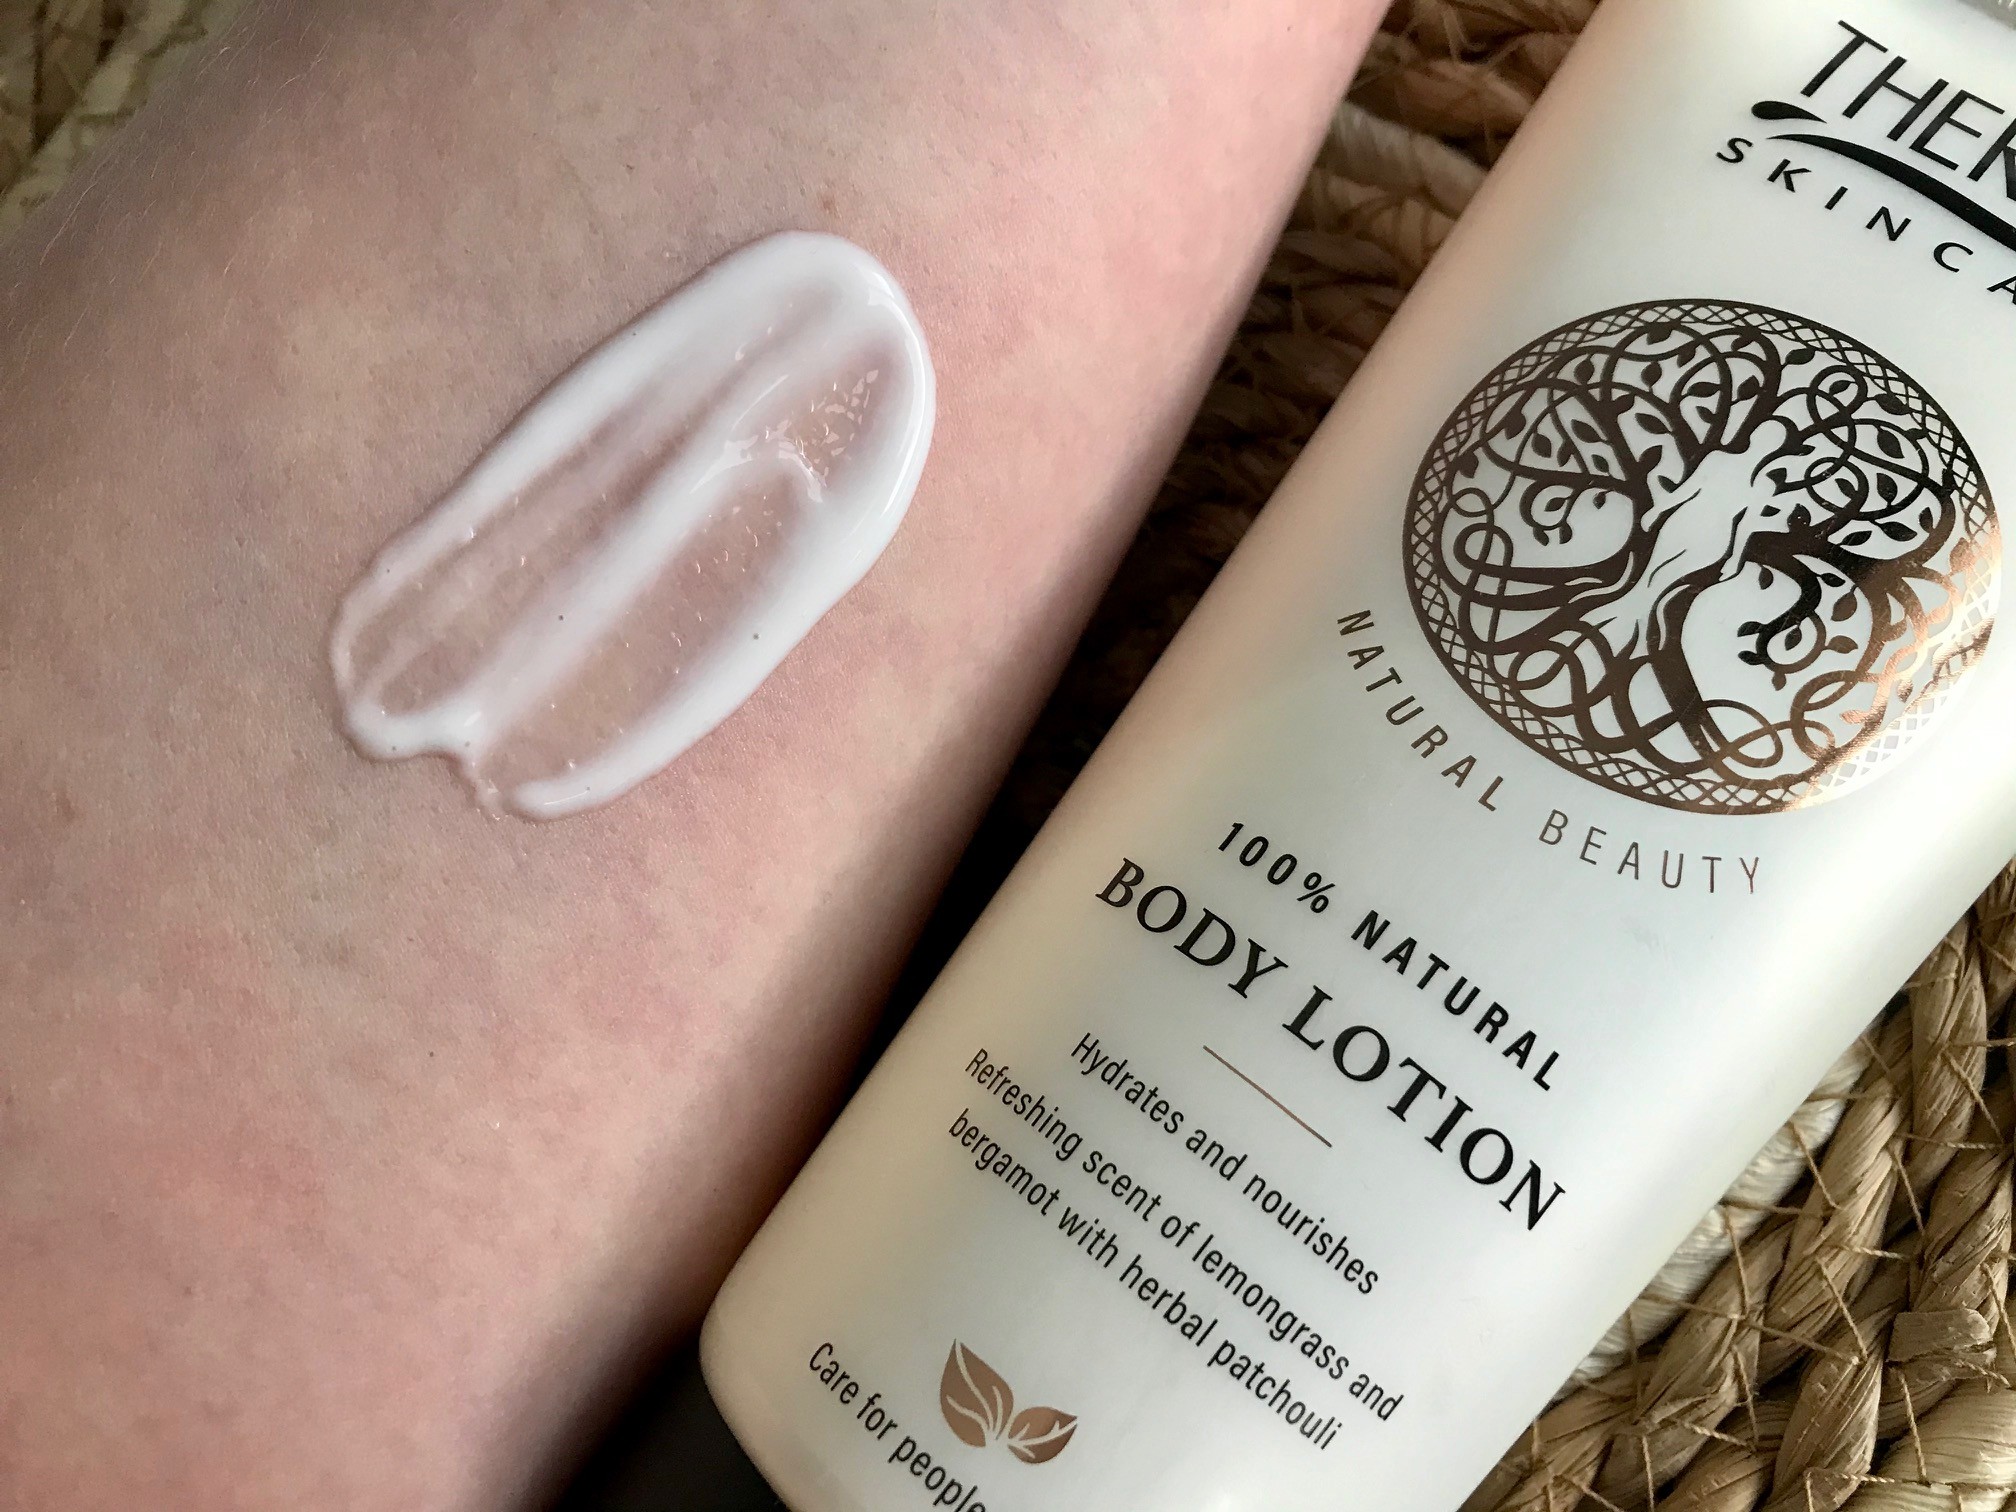 therme natural beauty bodylotion